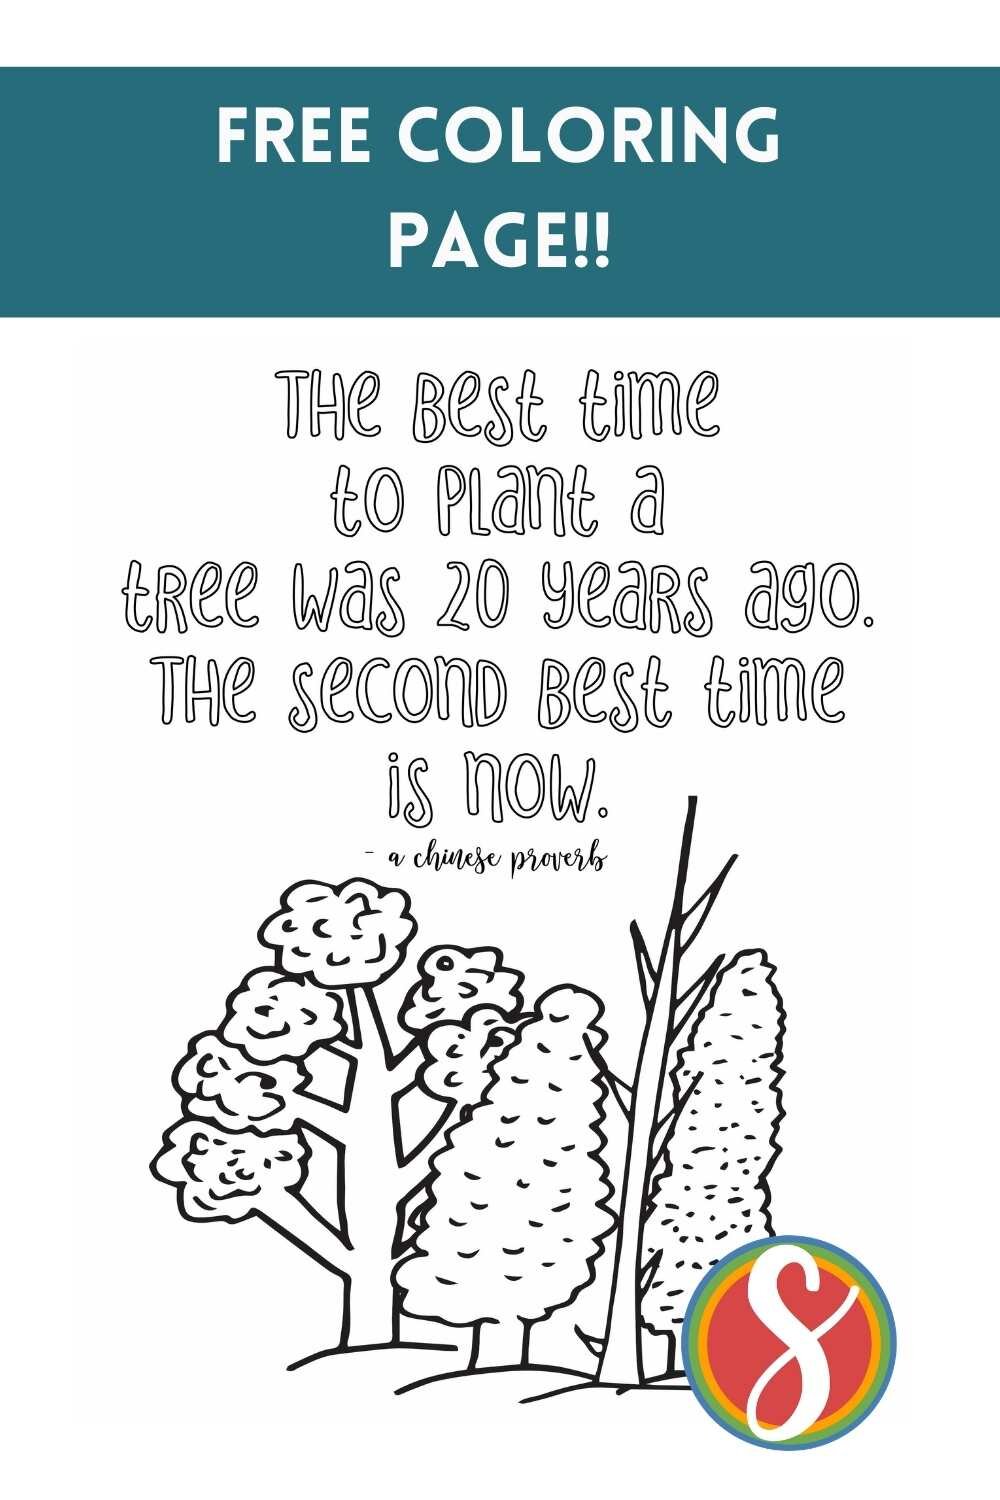 The best time to plant a tree was 20 years ago. The second best time is now. (a chinese proverb) - free printable quote coloring page from Stevie Doodles